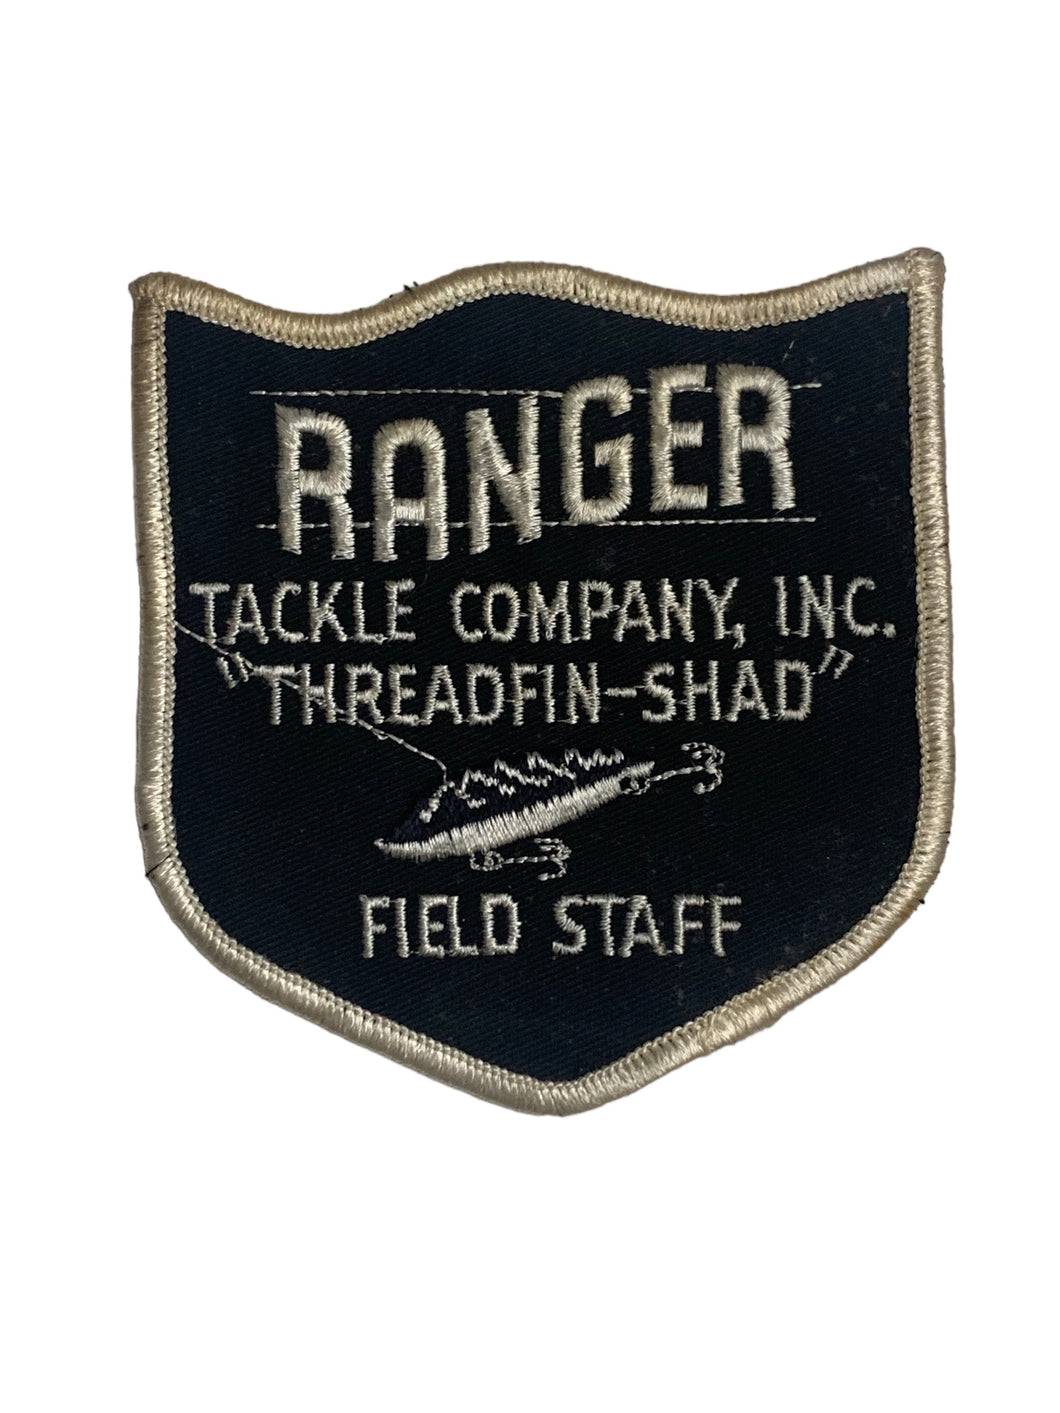 RANGER TACKLE COMPANY, INC • THREADFIN-SHAD FIELD STAFF Vintage Patch